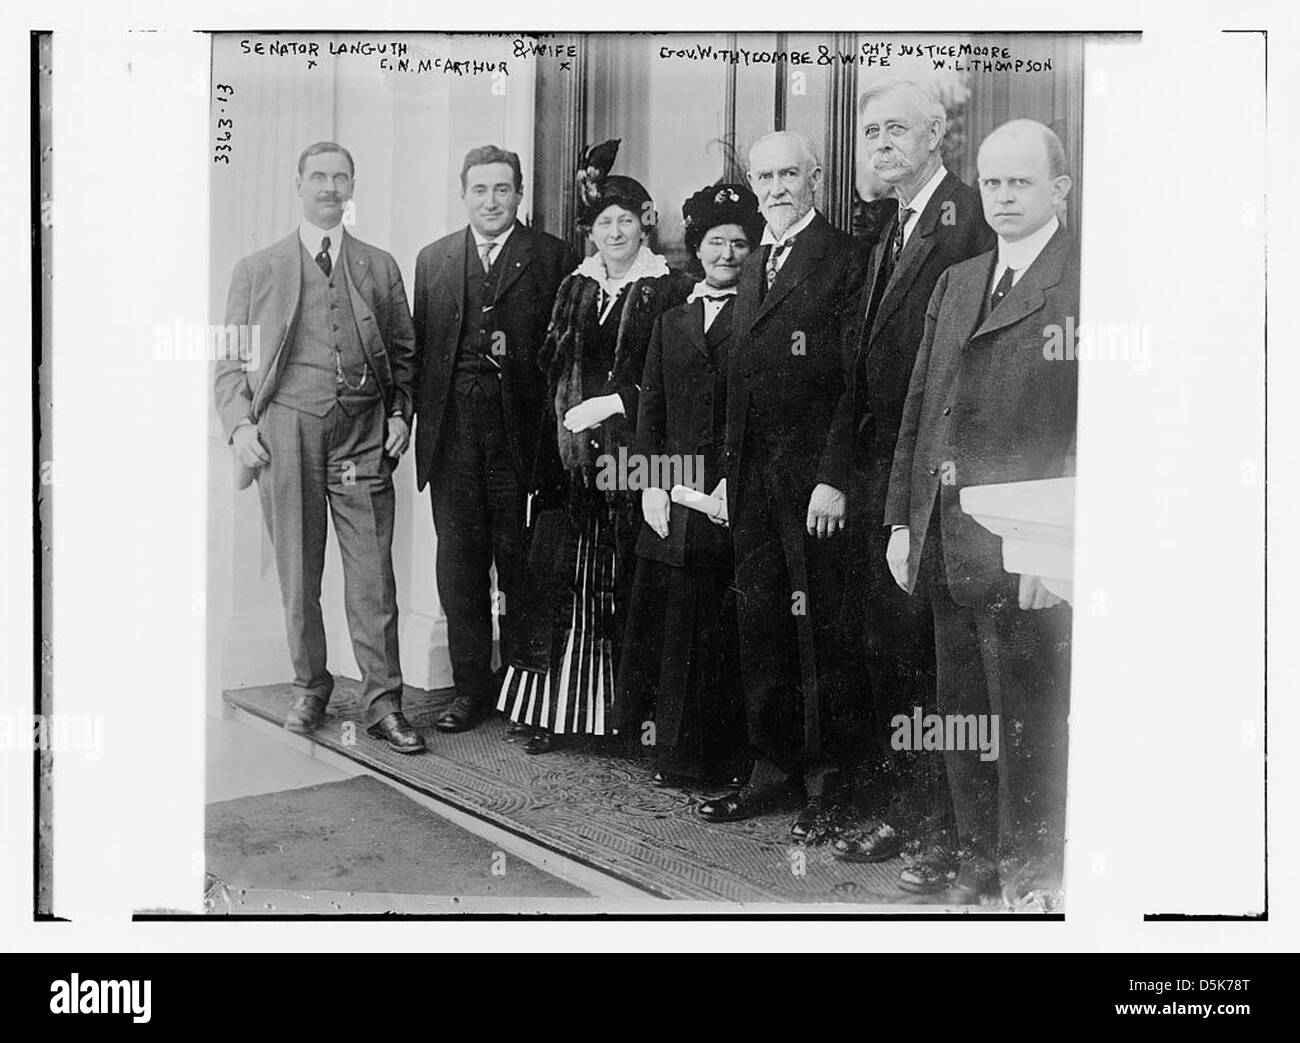 Sen. Languth, C.N. McArthur & wife, Gov. Withycombe & wife, Chf. [i.e., Chief] Justice Moore, W.L. Thompson (LOC) Stock Photo